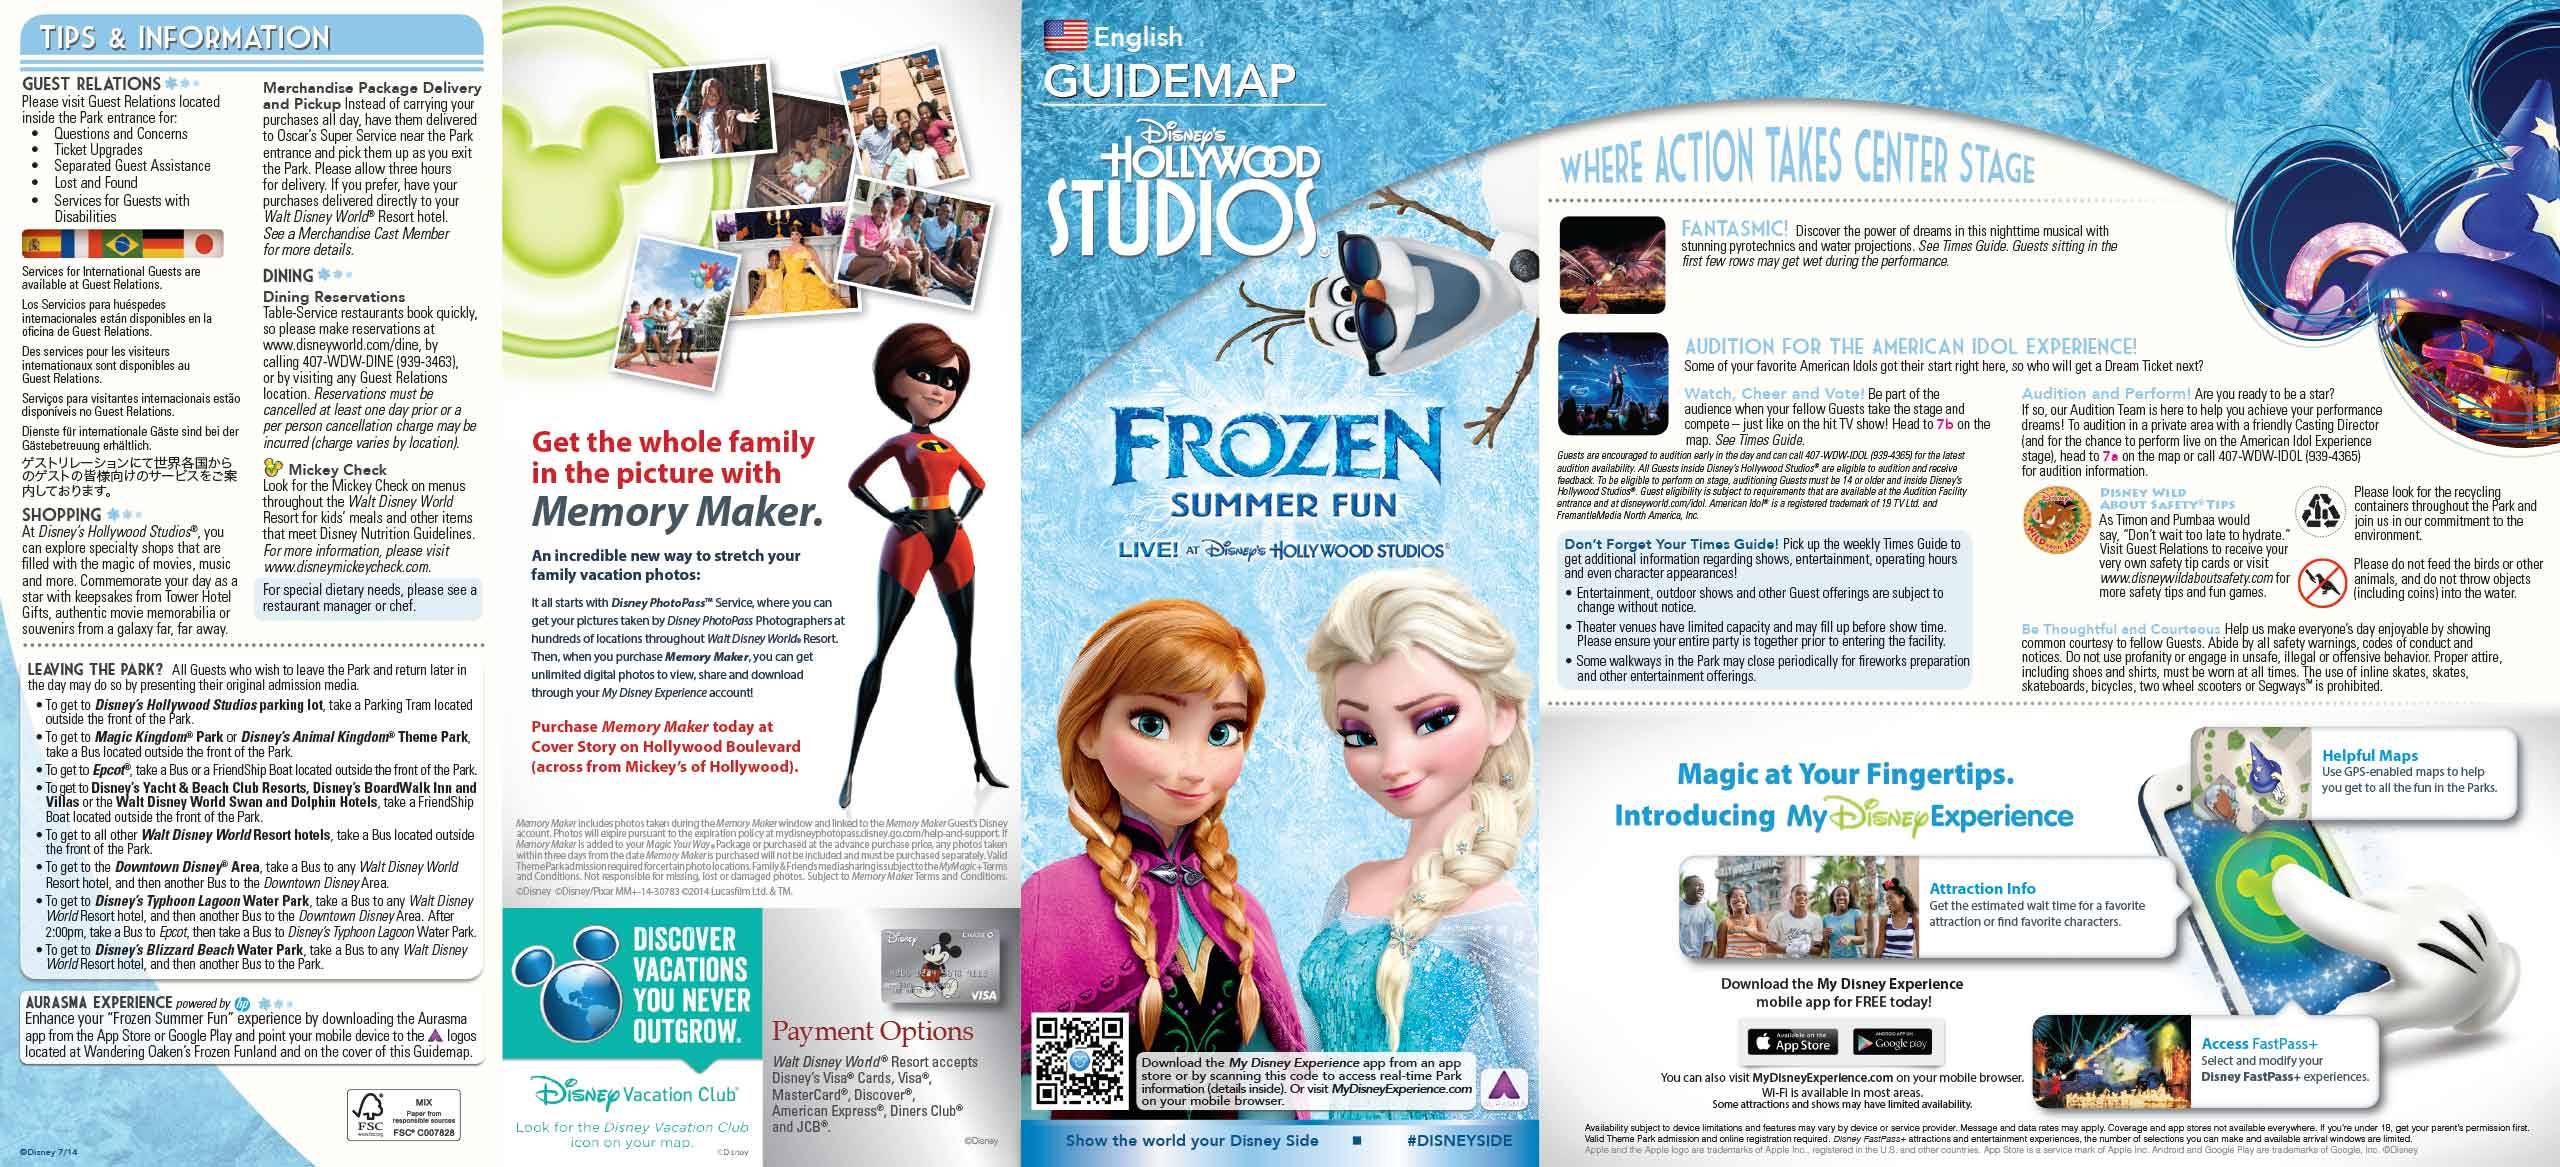 Frozen Summer Fun - LIVE at Disney's Hollywood Studios guide map front